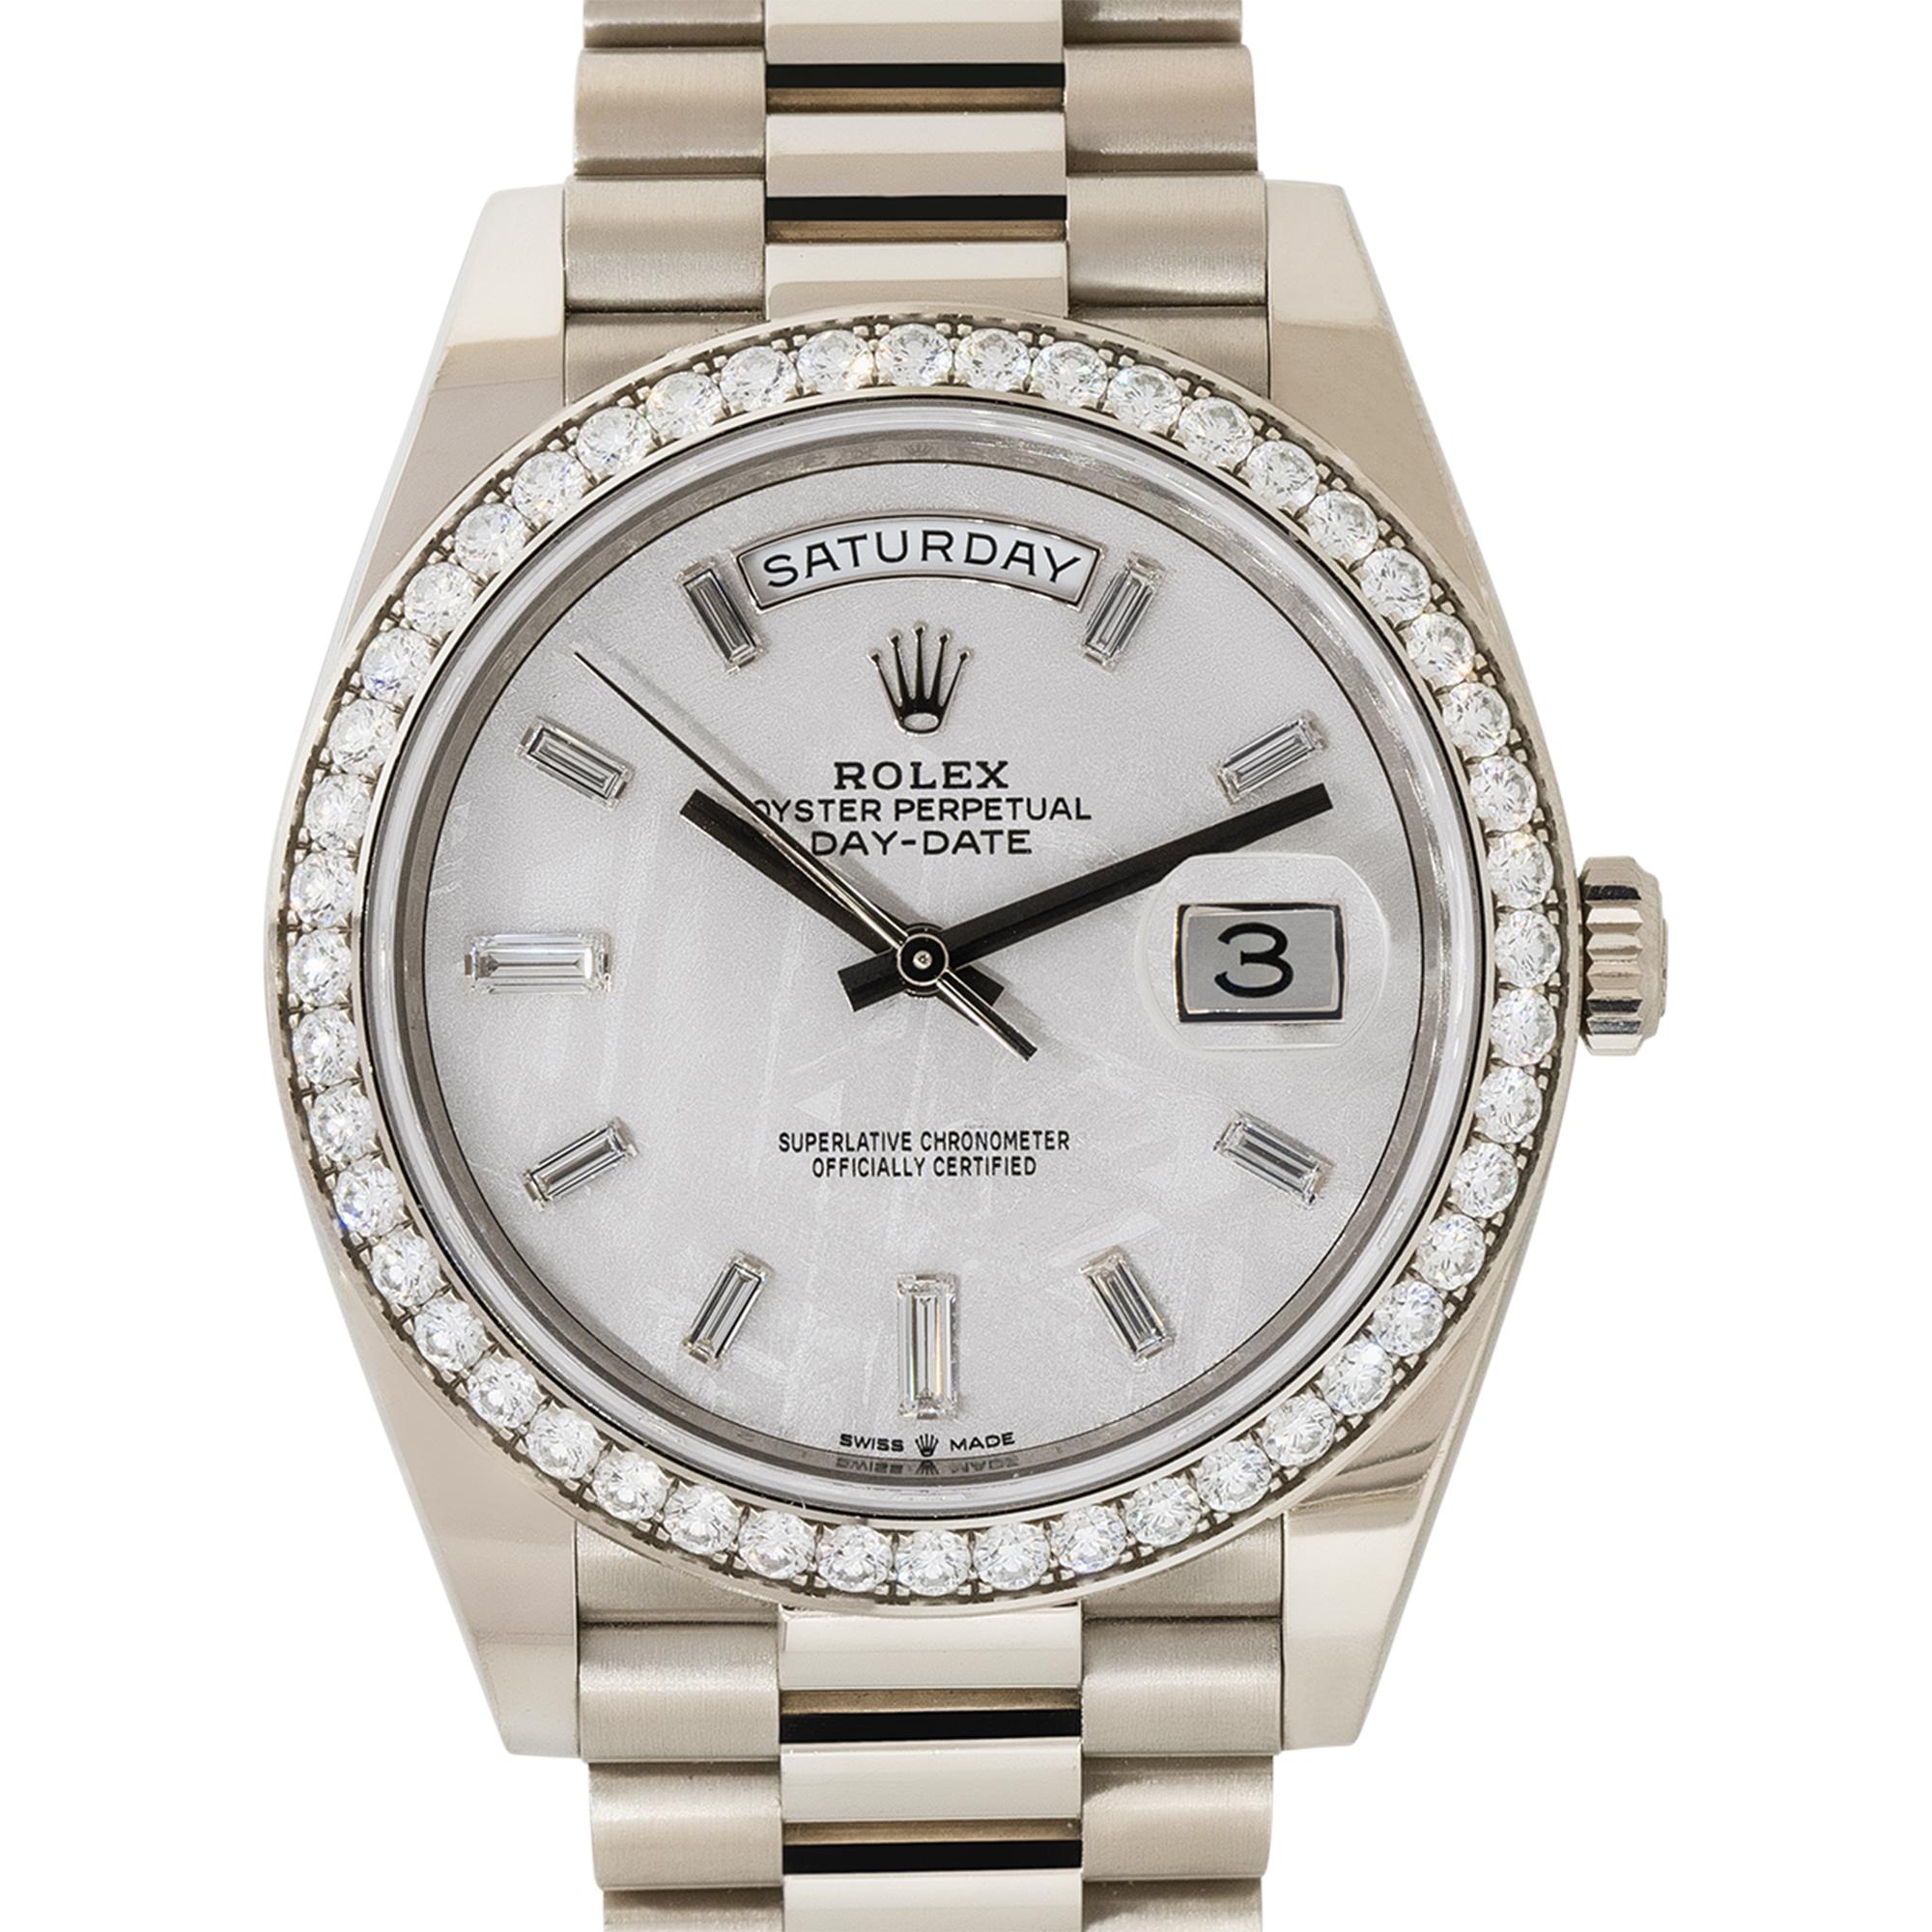 Brand: Rolex
Case Material: 18k White Gold
Case Diameter: 40mm
Crystal: Sapphire Crystal
Bezel: 18k white gold bezel with Diamonds
Dial: Meteorite dial with white gold hands and Diamond hour markers.Date can be found at 3 o'clock as well as day at